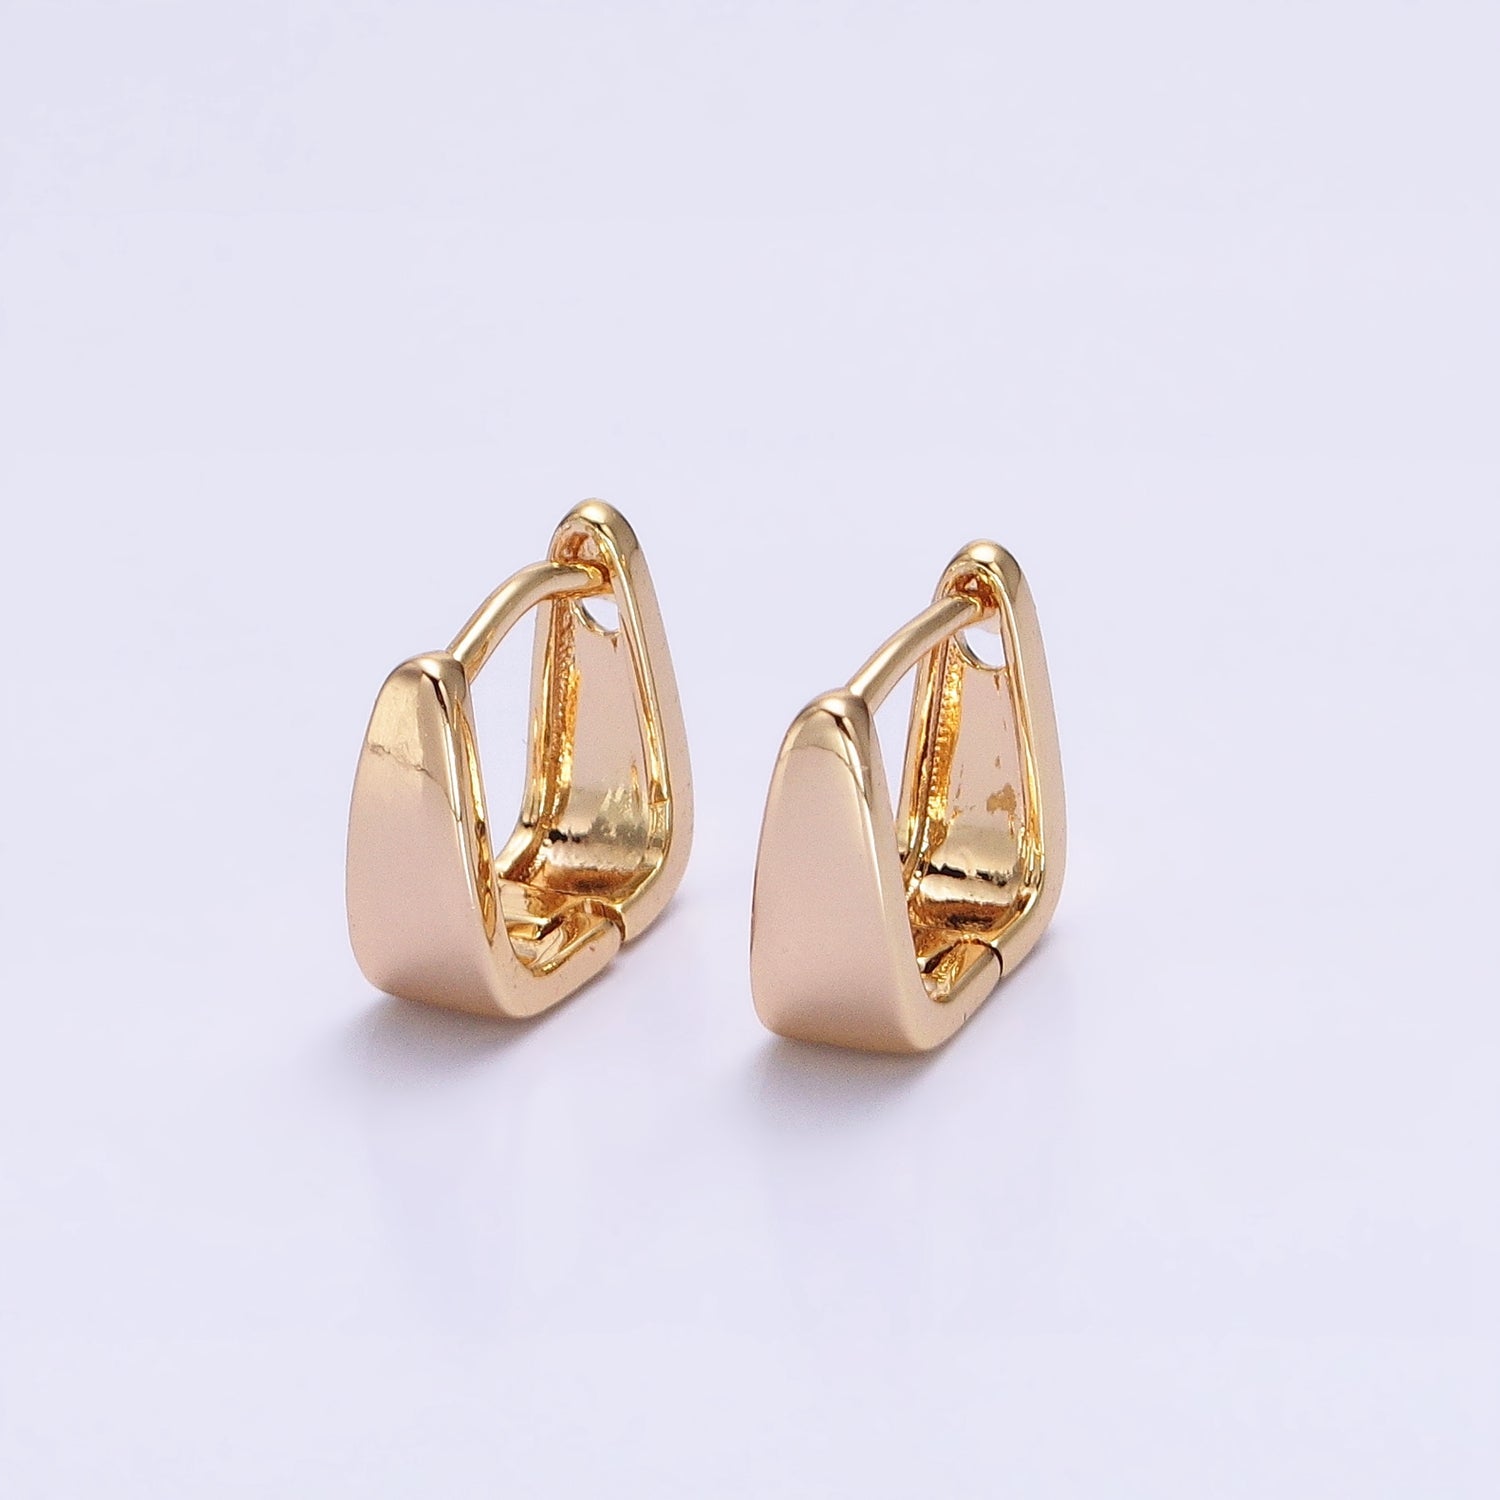 Silver, Gold Geometric Square Triangle 10mm Cartilage Huggie Earrings | AB965 AB966